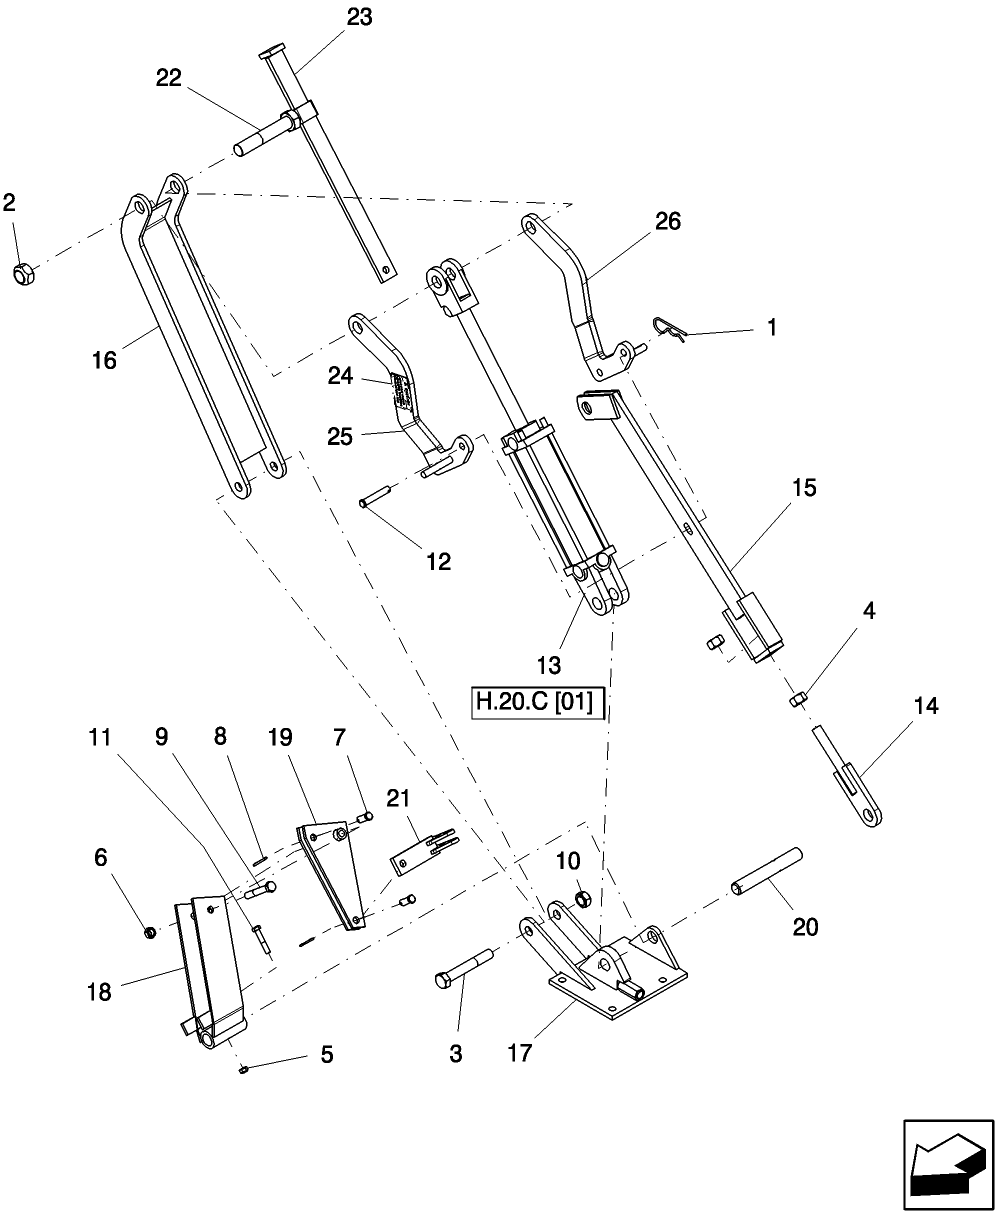 H.20.C(03) WHEELED BOOM - SLAVE CYLINDER LINKAGE ASSEMBY (RIGHT HAND SIDE)